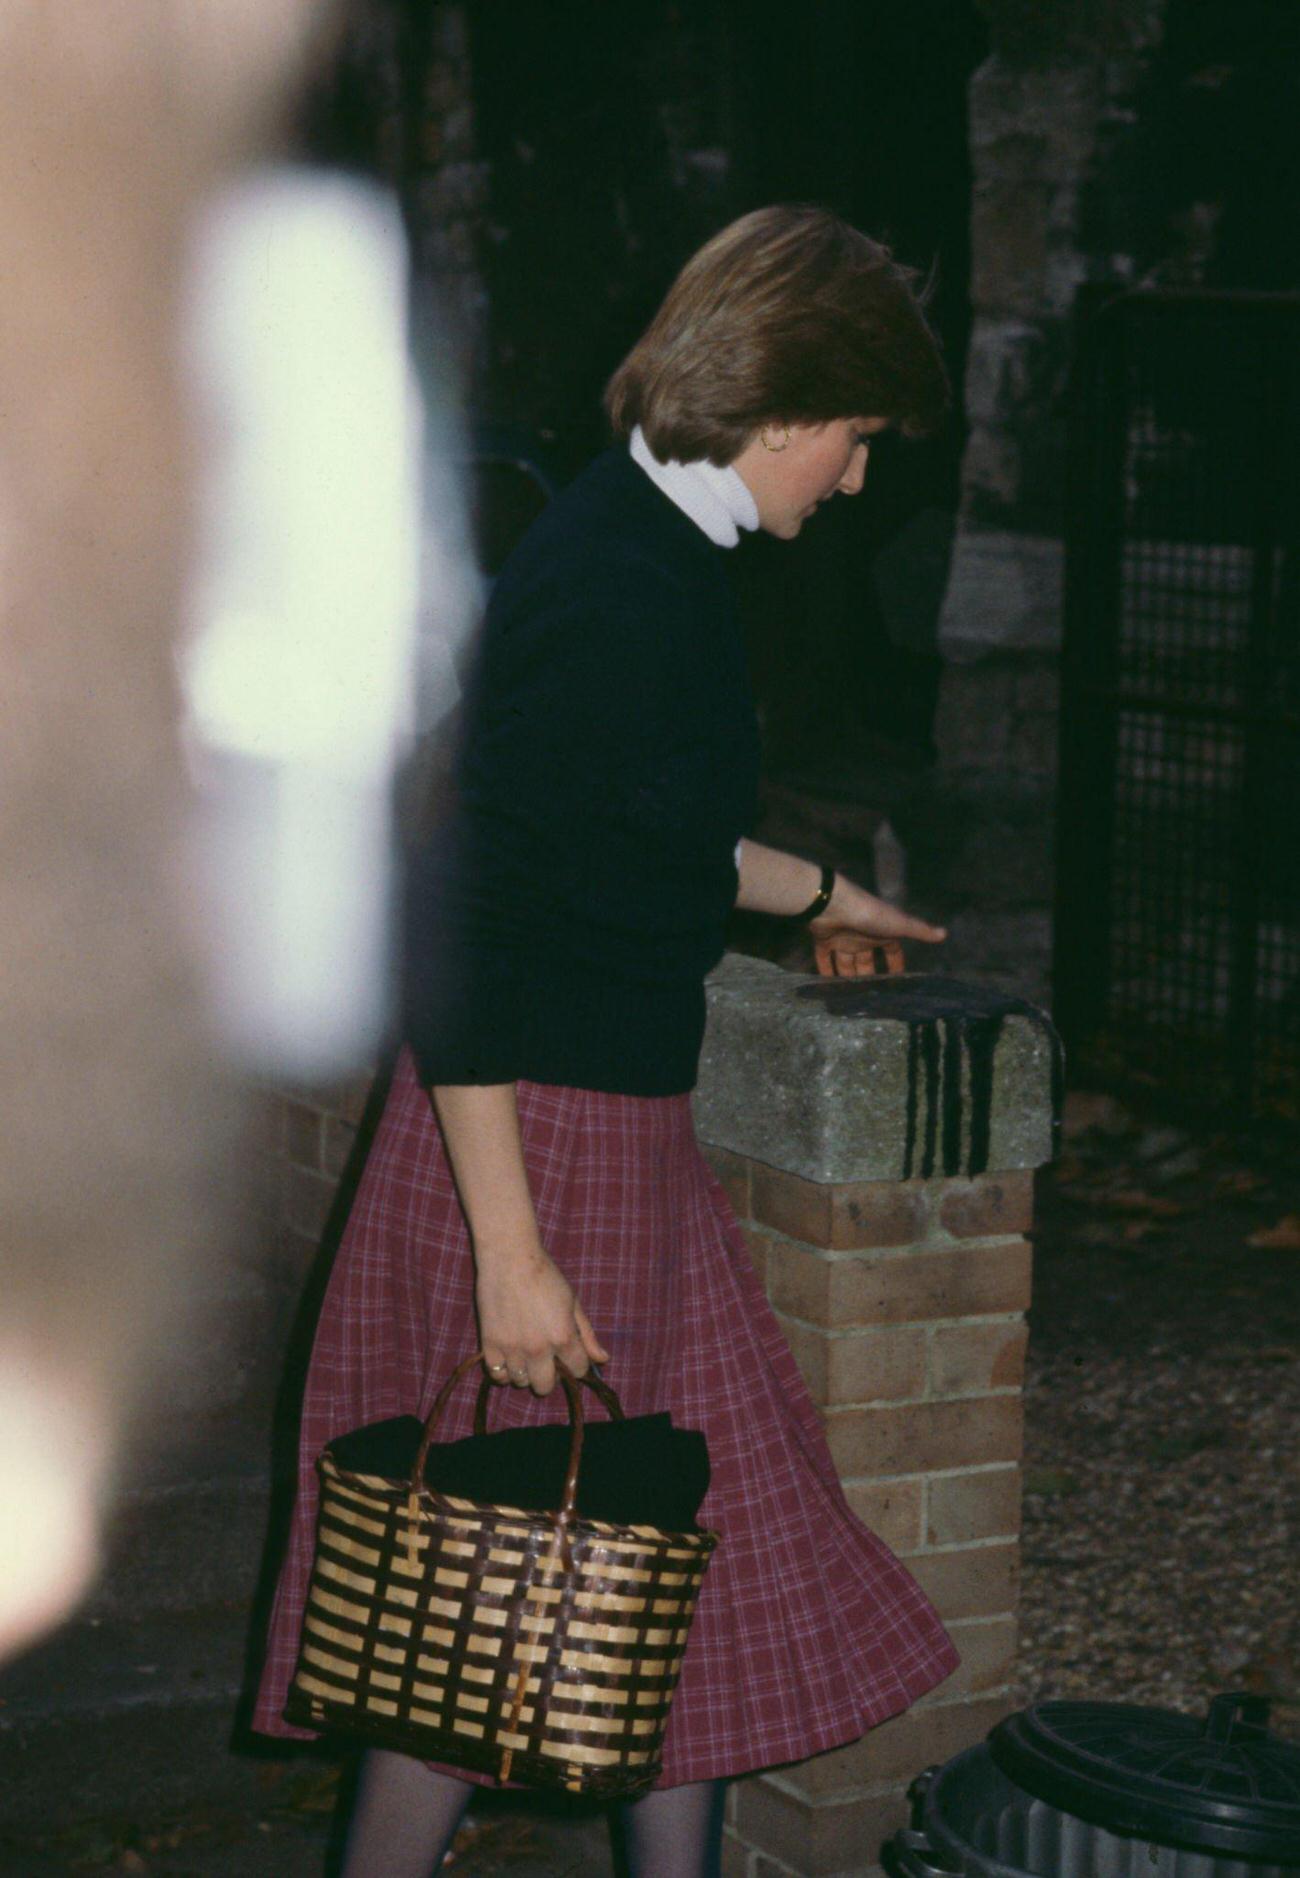 Lady Diana wearing a dark sweater with a deep red plaid skirt, and carrying a brown handbag, leaves the Young England kindergarten in Pimlico, London, England, October 1980.